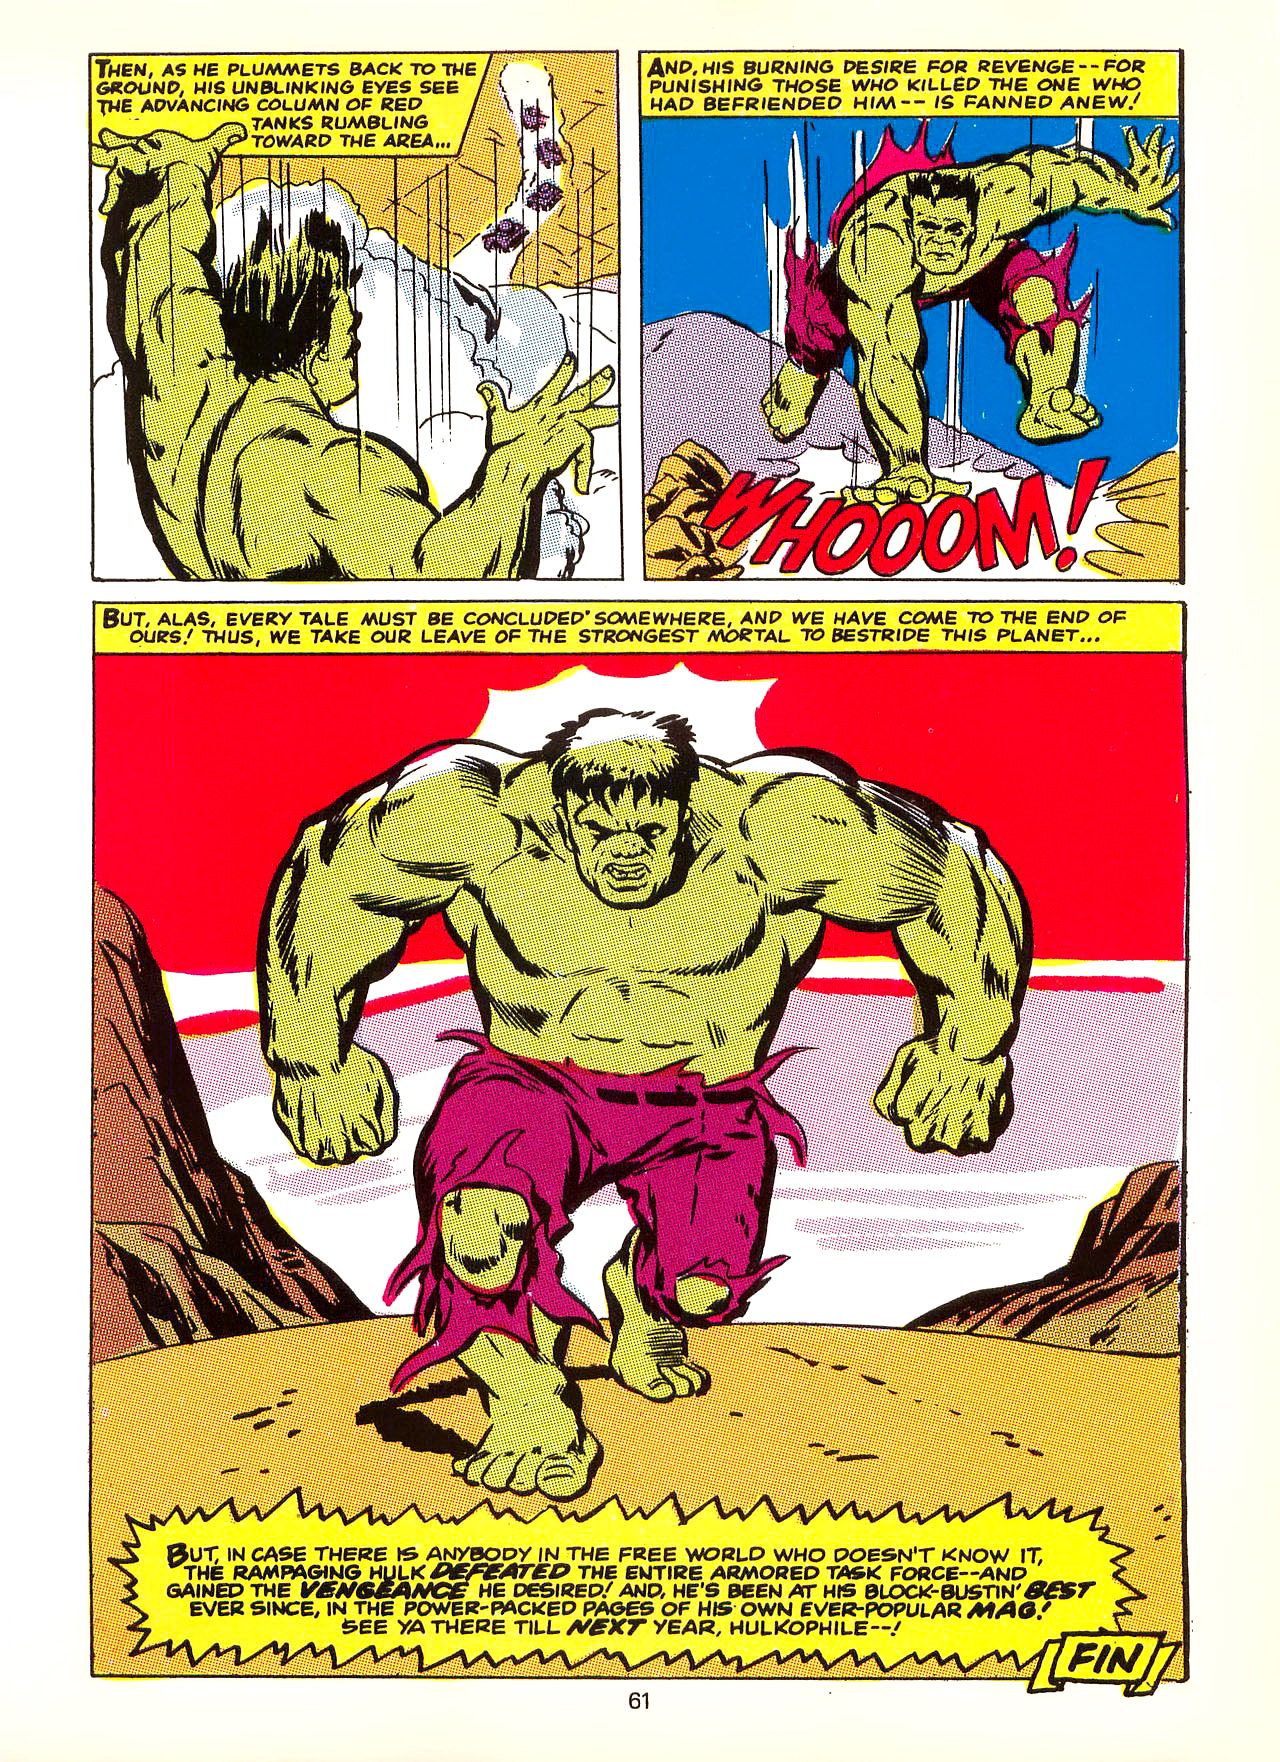 Read online Incredible Hulk Annual comic -  Issue #1978 - 61